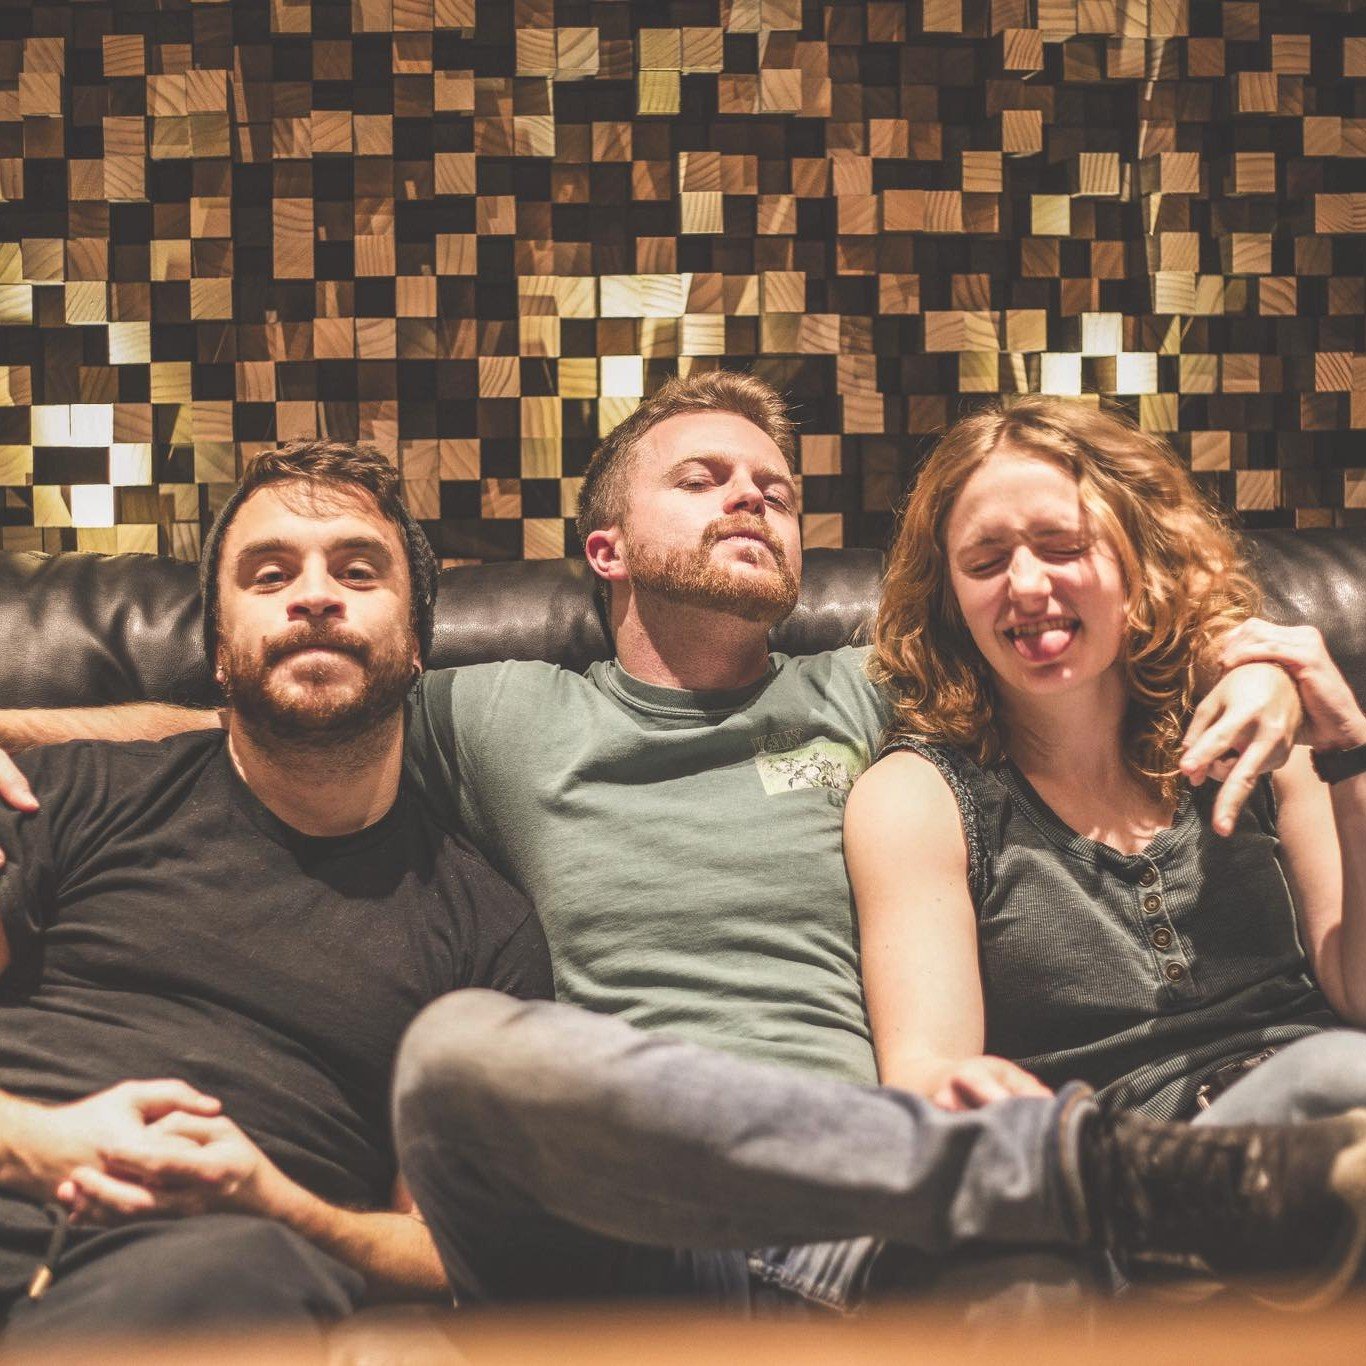 Carolina Calls NC, a hometown band from Greensboro, is making waves across the Triad with their dynamic performances. Known for their captivating blend of original compositions and stellar covers, their music style is best described as Folk/Southern 